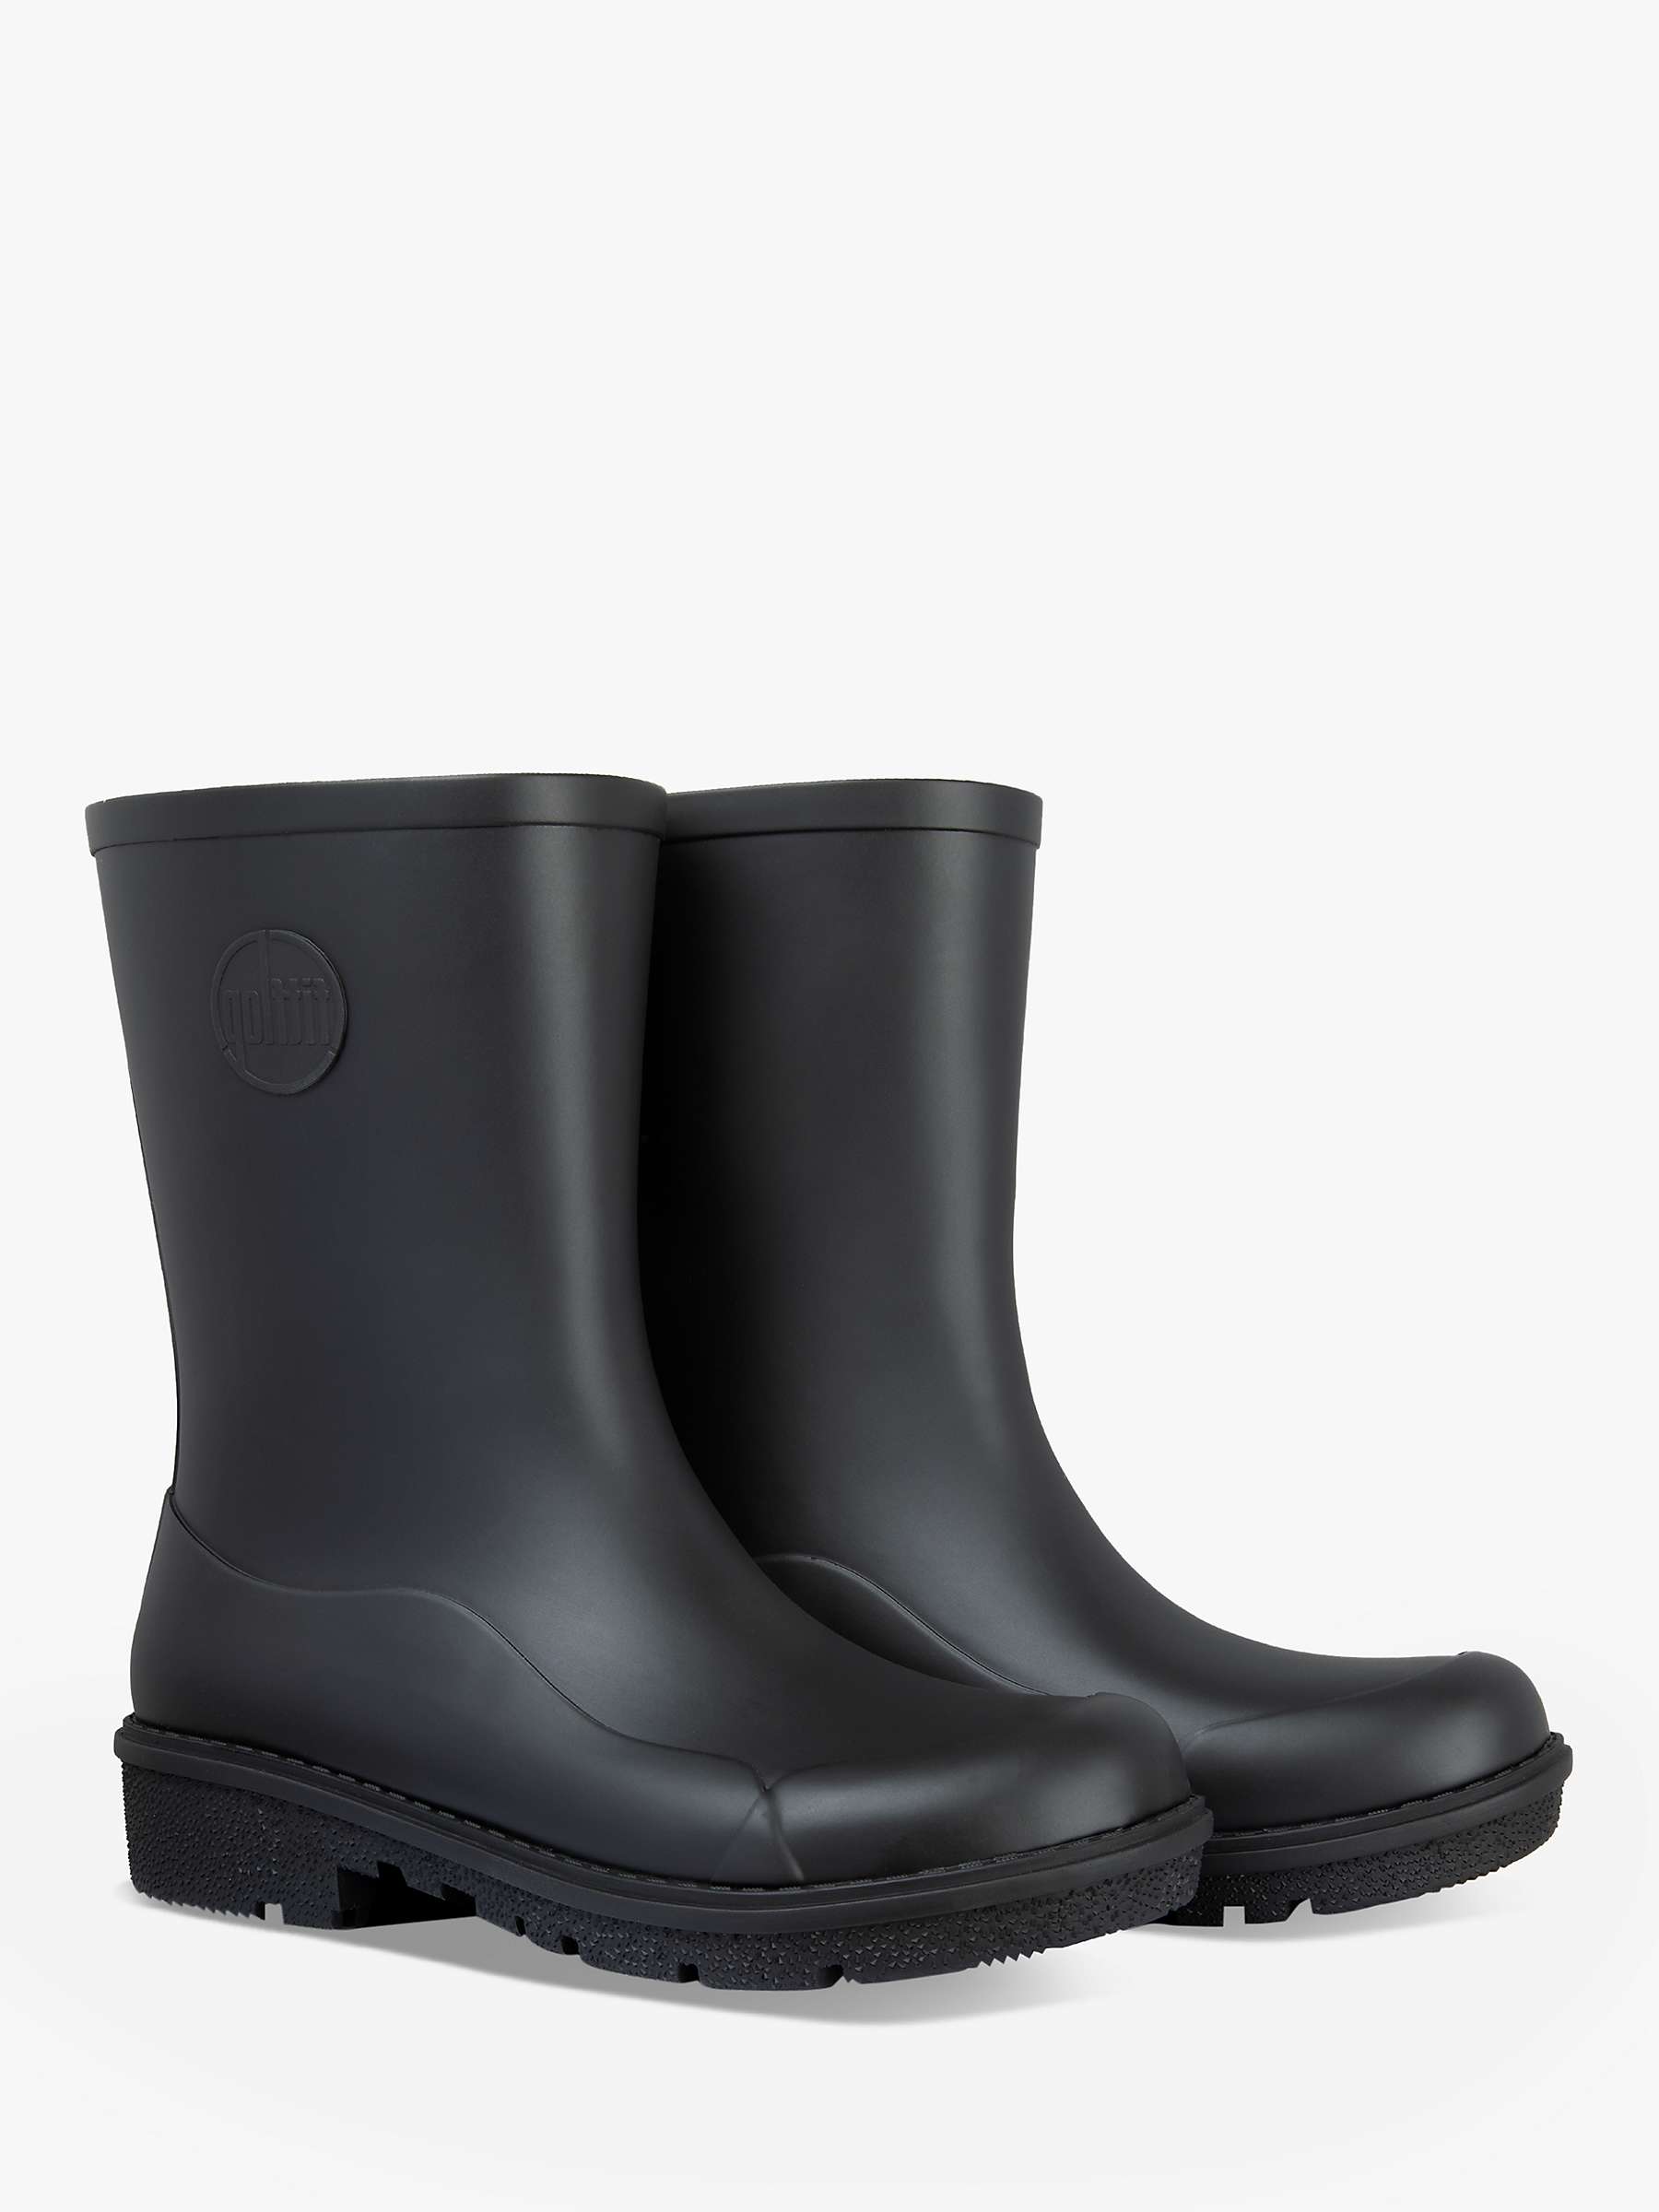 Buy FitFlop Wonderwelly Short Wellington Boots Online at johnlewis.com